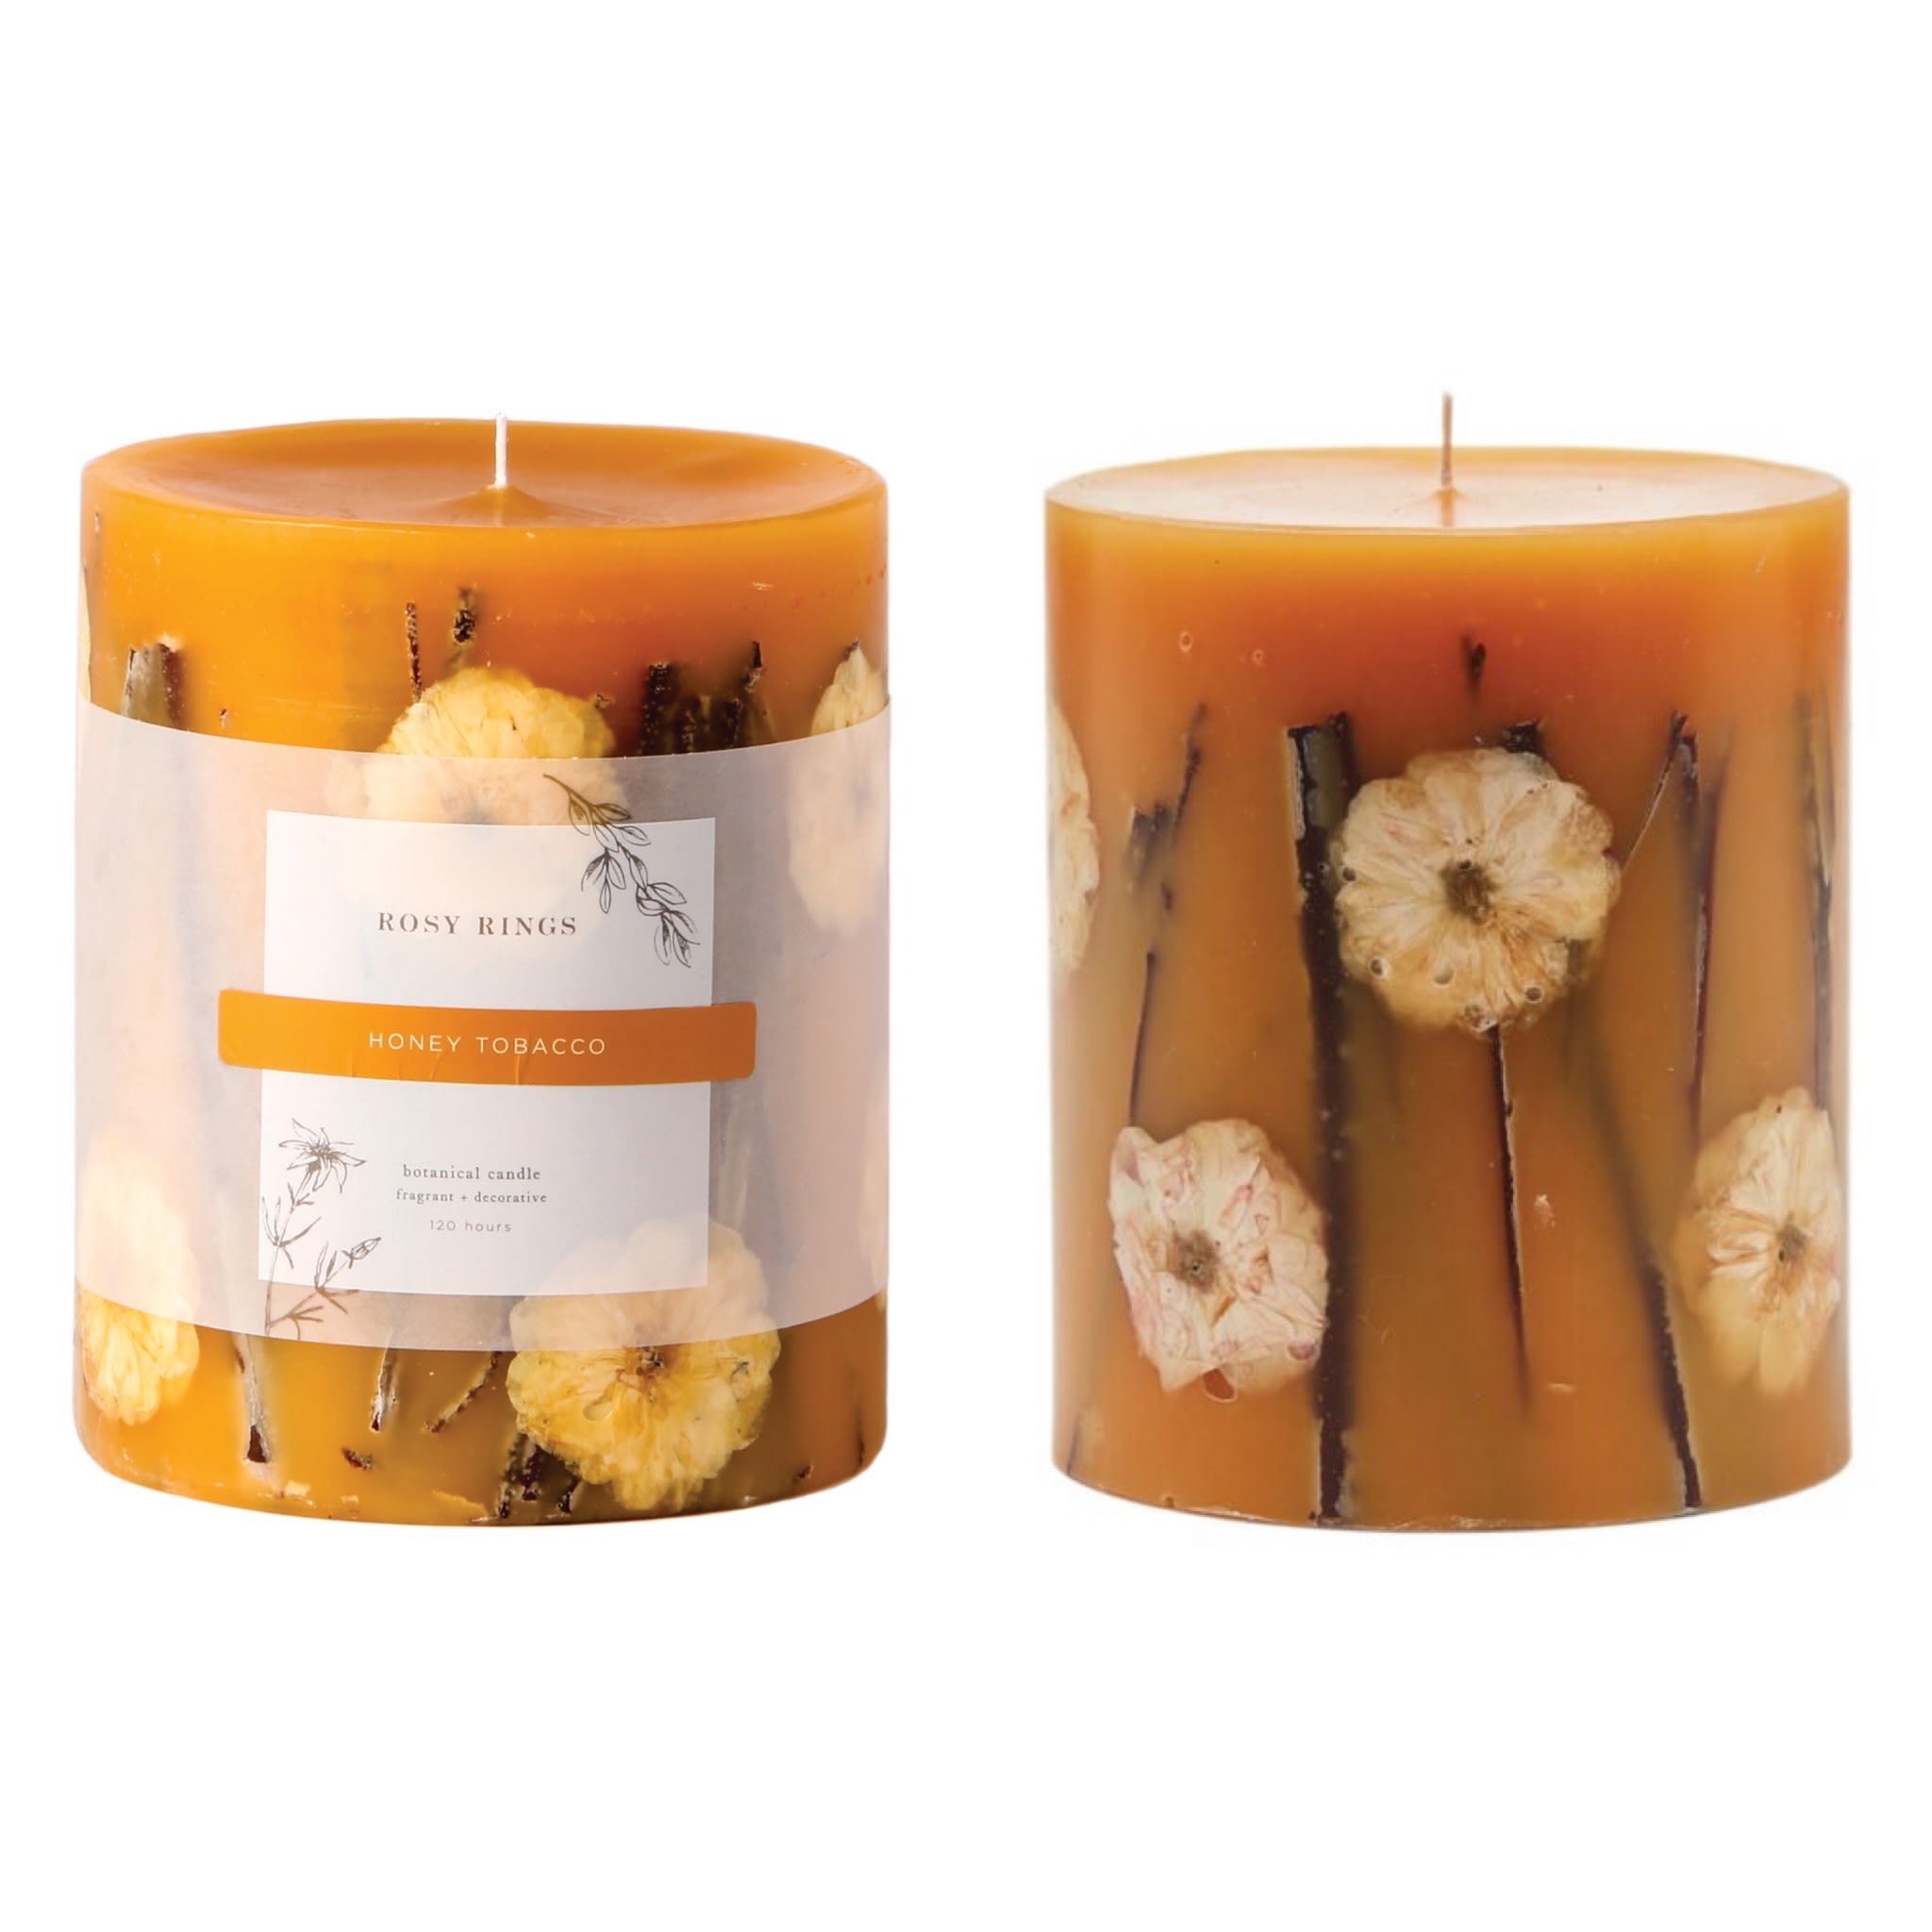 Rosy Rings Honey Tobacco Botanical Candle - Leather-bound books, antique wood, pipe tobacco paired with a golden drizzle of vanilla infused honey. 120 hours approx. burn time. A fragranced wax core is wrapped in a flame retardant barrier and then placed in a larger mold. A skilled artisan then carefully places the natural items around the core and hand pours a proprietary blend of wax into the mold. Each botanical work of art takes two days to produce. The botanicals are beautifully illuminated when the candle is lit. Rosy Rings is internationally recognized as the preeminent botanical candle manufacturer.